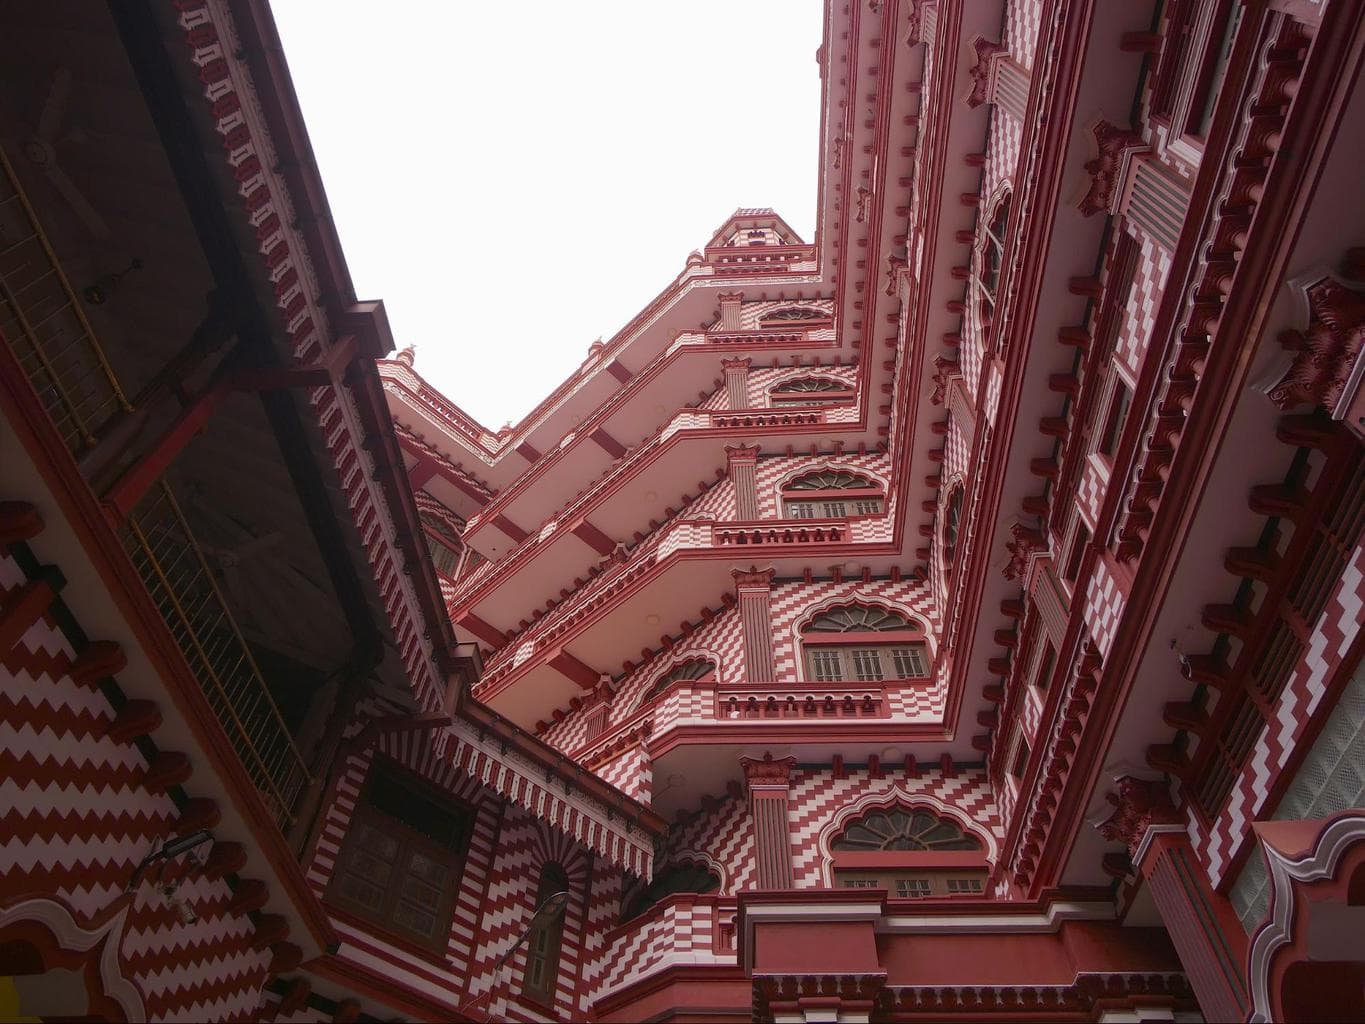 Inside the Red Mosque in Colombo